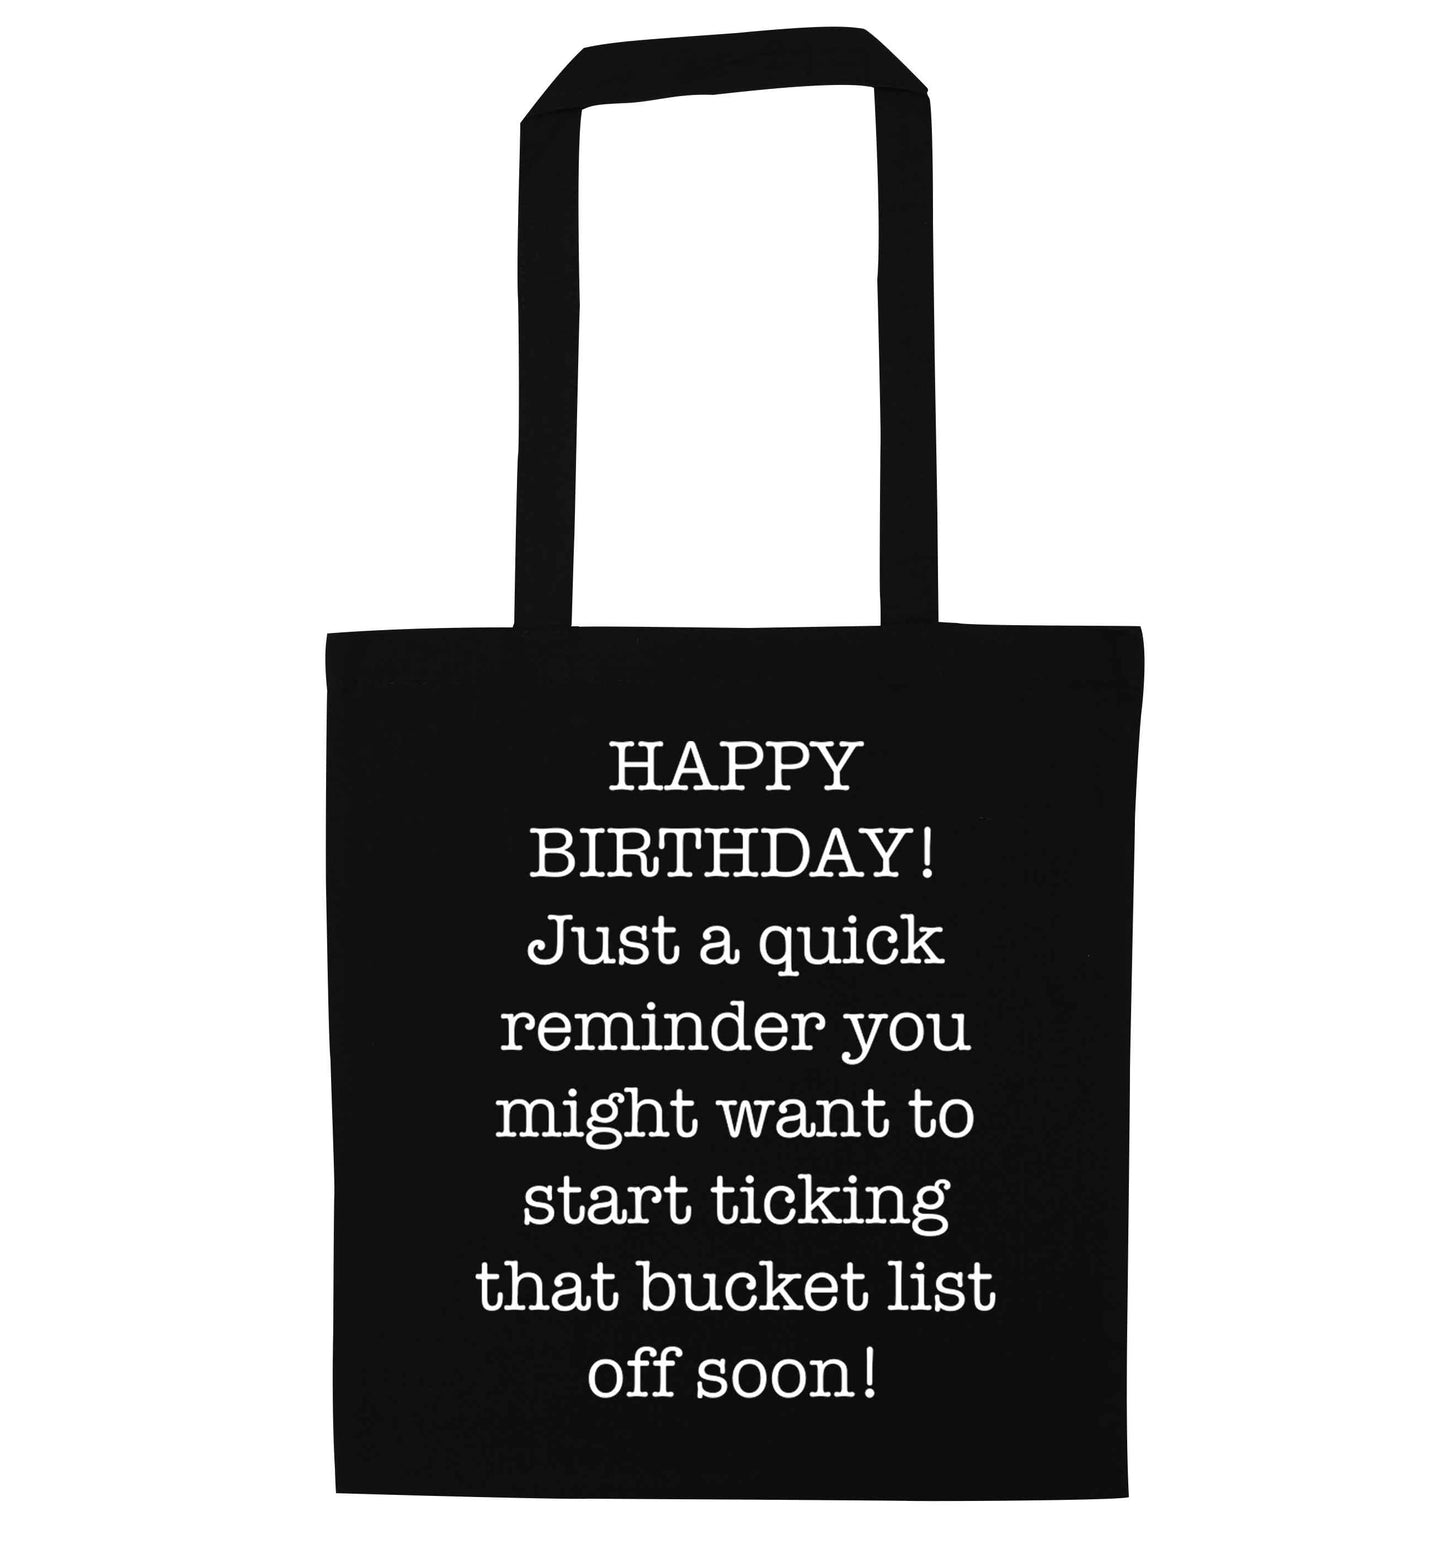 Happy birthday, just a quick reminder you might want to start ticking that bucket list off soon black tote bag